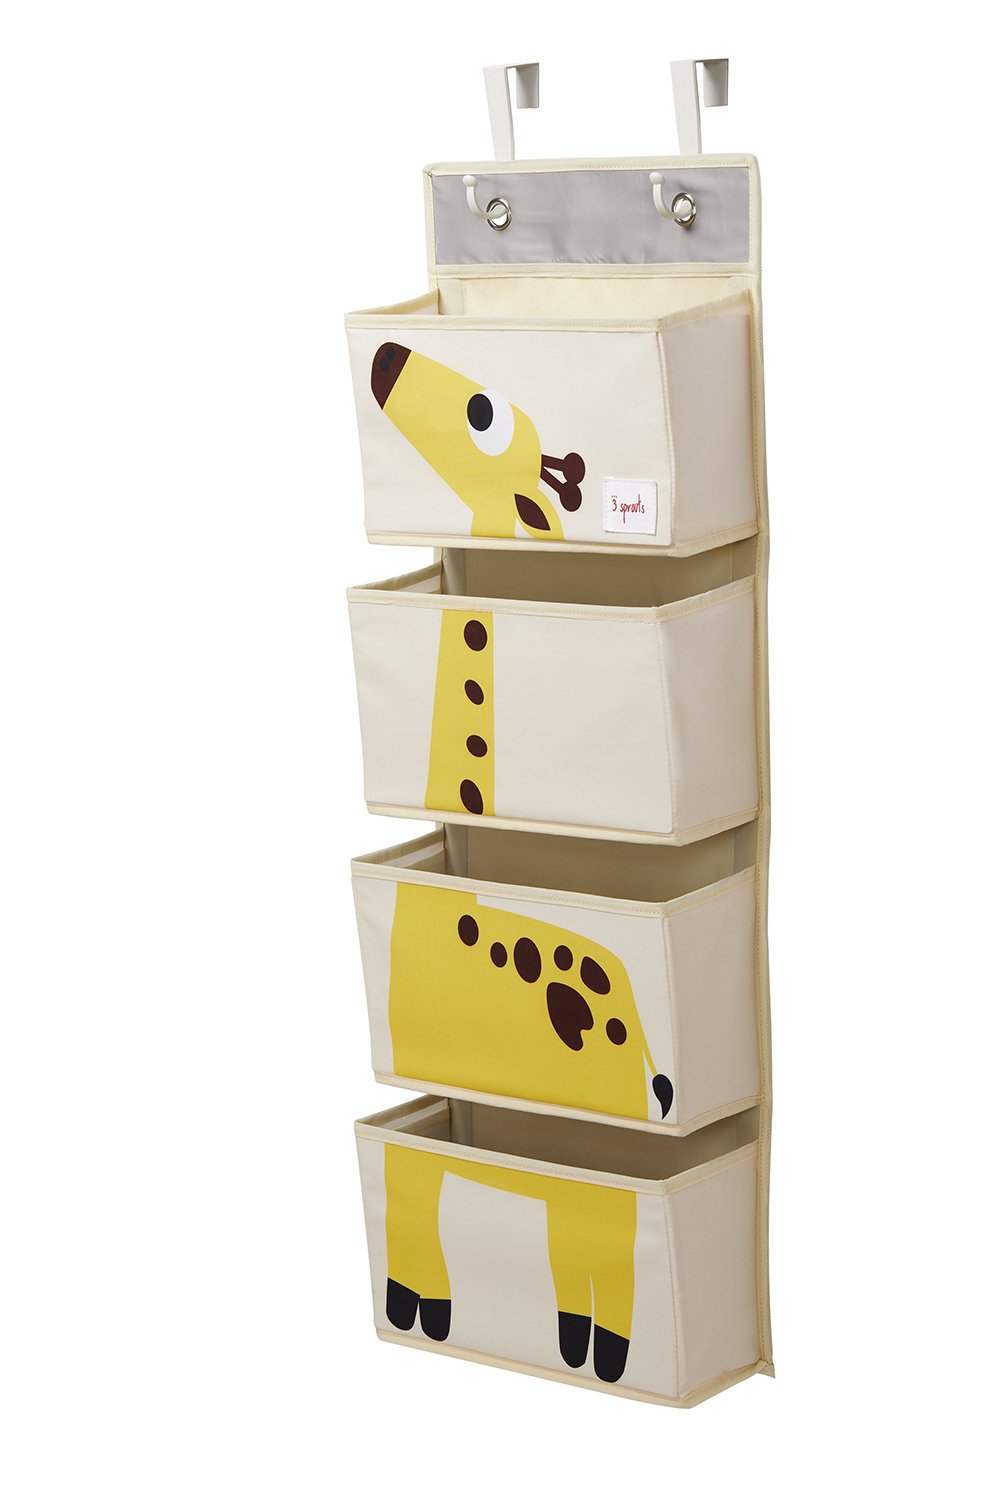 3Sprouts_Hanging_Wall_Organizer_Giraffe_angled_1024x1024@2x